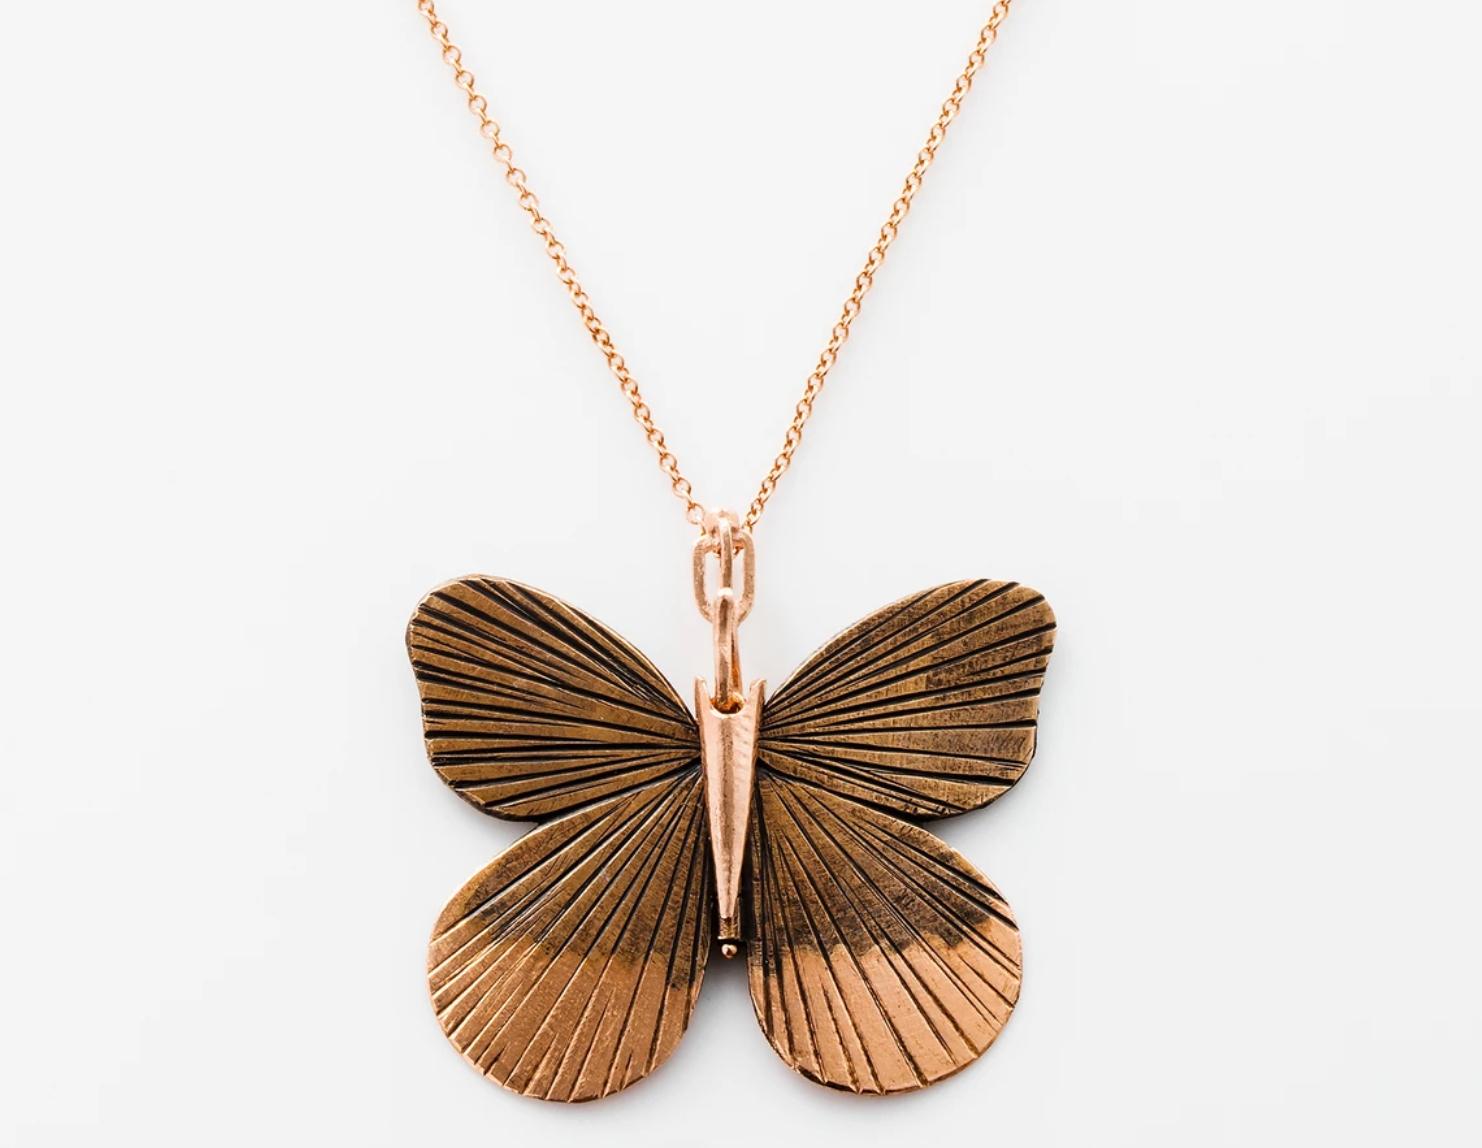 James Banks's signature butterfly necklace features a Large Asterope butterfly with a hinge at the center to allow movement of the wings, set in Oxidized Rose Bronze and 14k Rose Gold hung on a 14k Rose Gold chain, with a secure clasp closure.